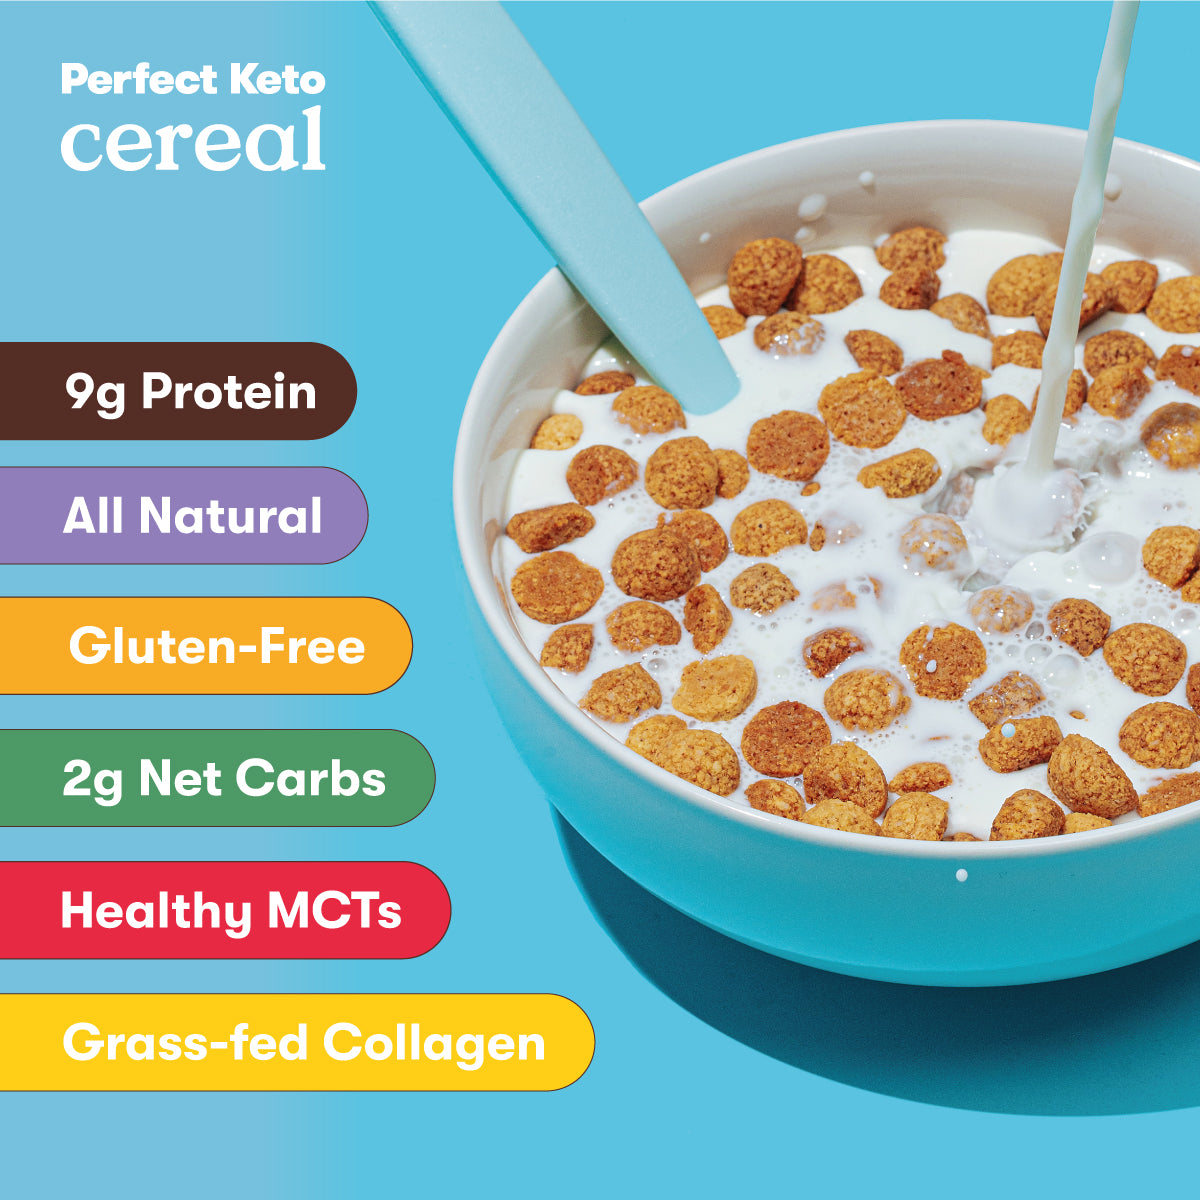 Keto Cereal